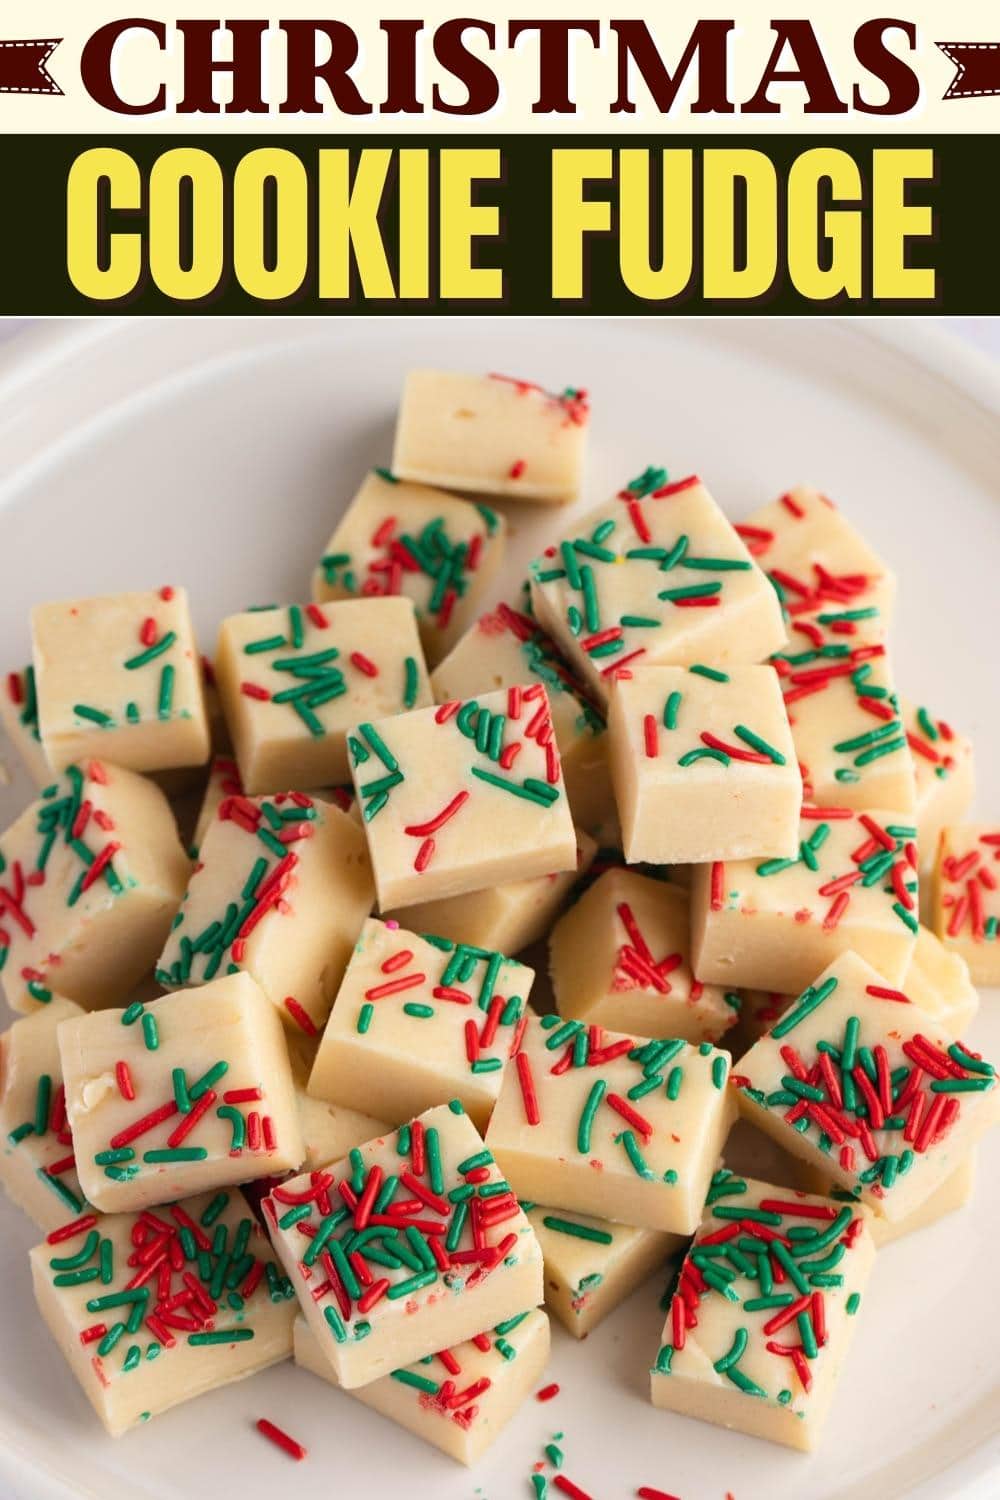 Bunch of Christmas Cookie Fudge with red and green sprinkles on top